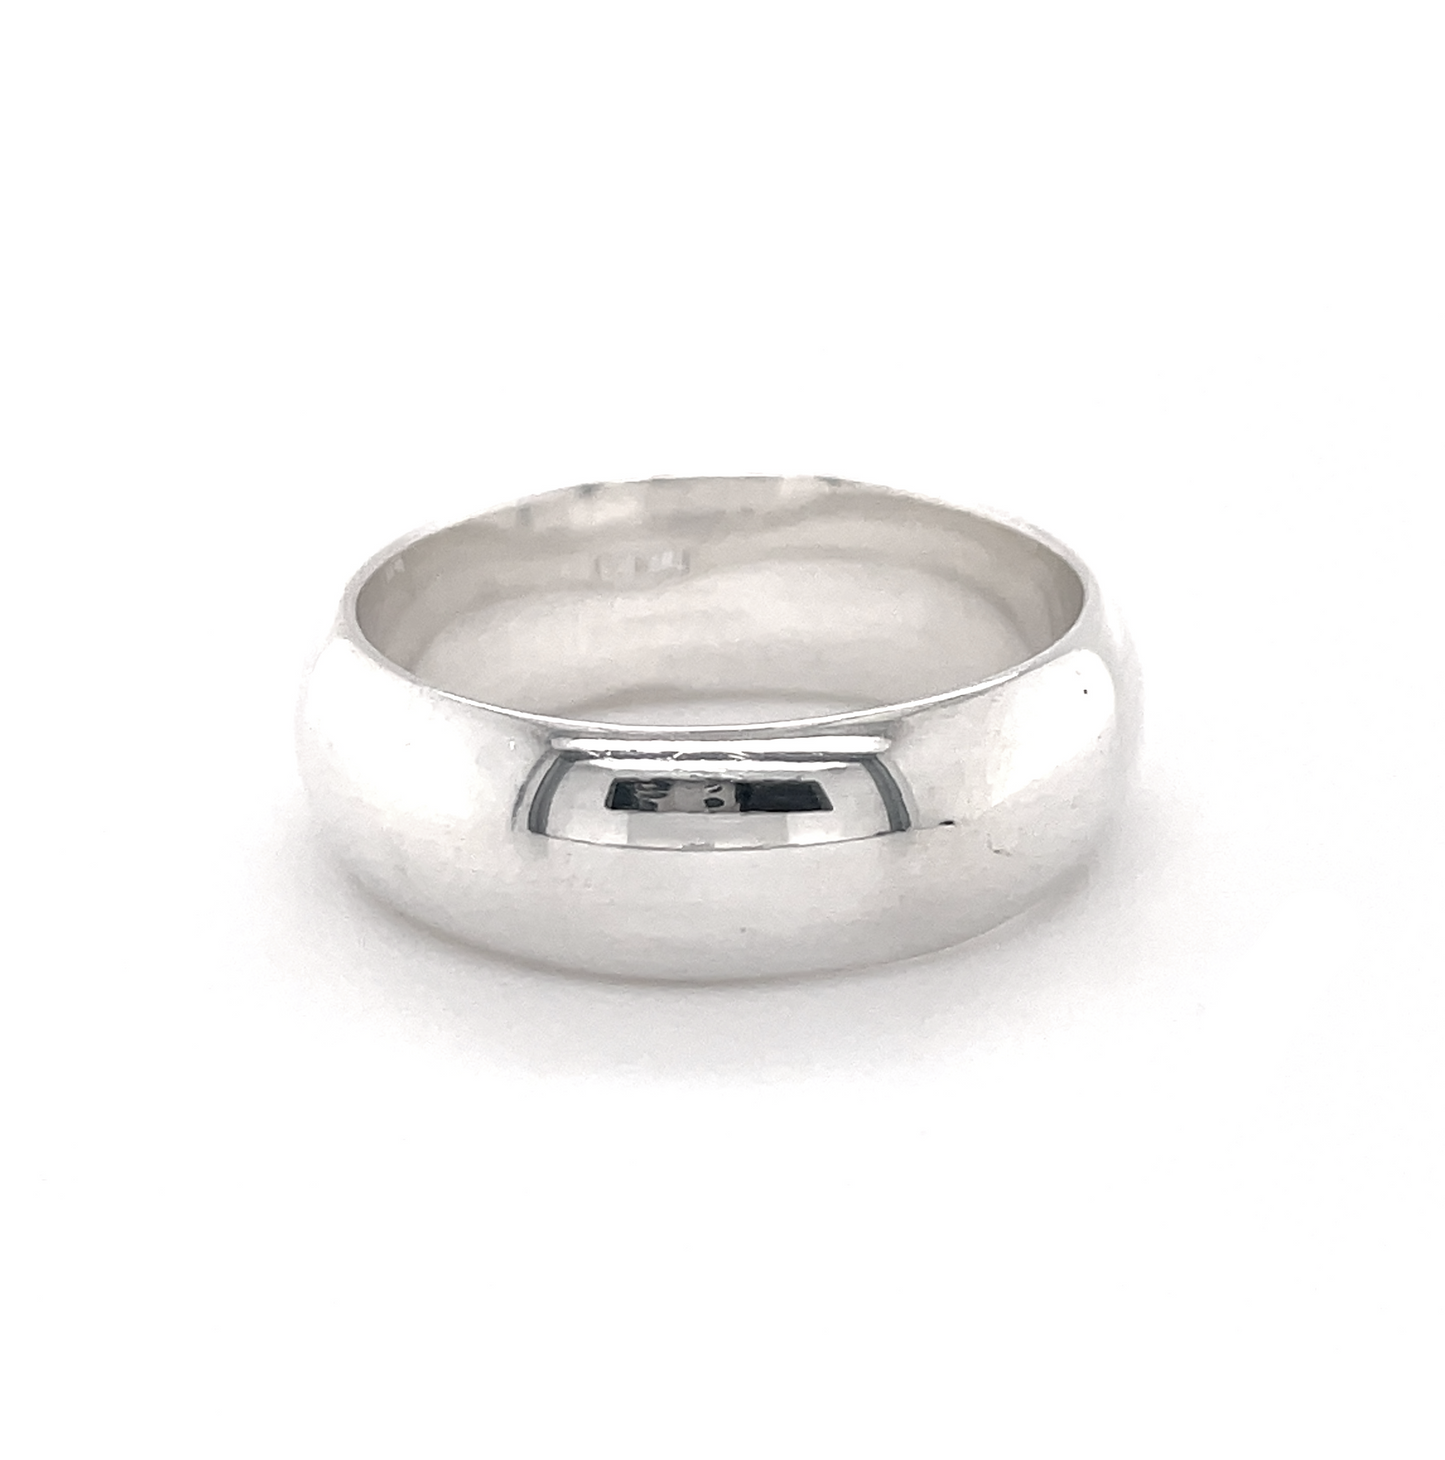 A simple 8mm Plain Band with a half-round band on a white background.